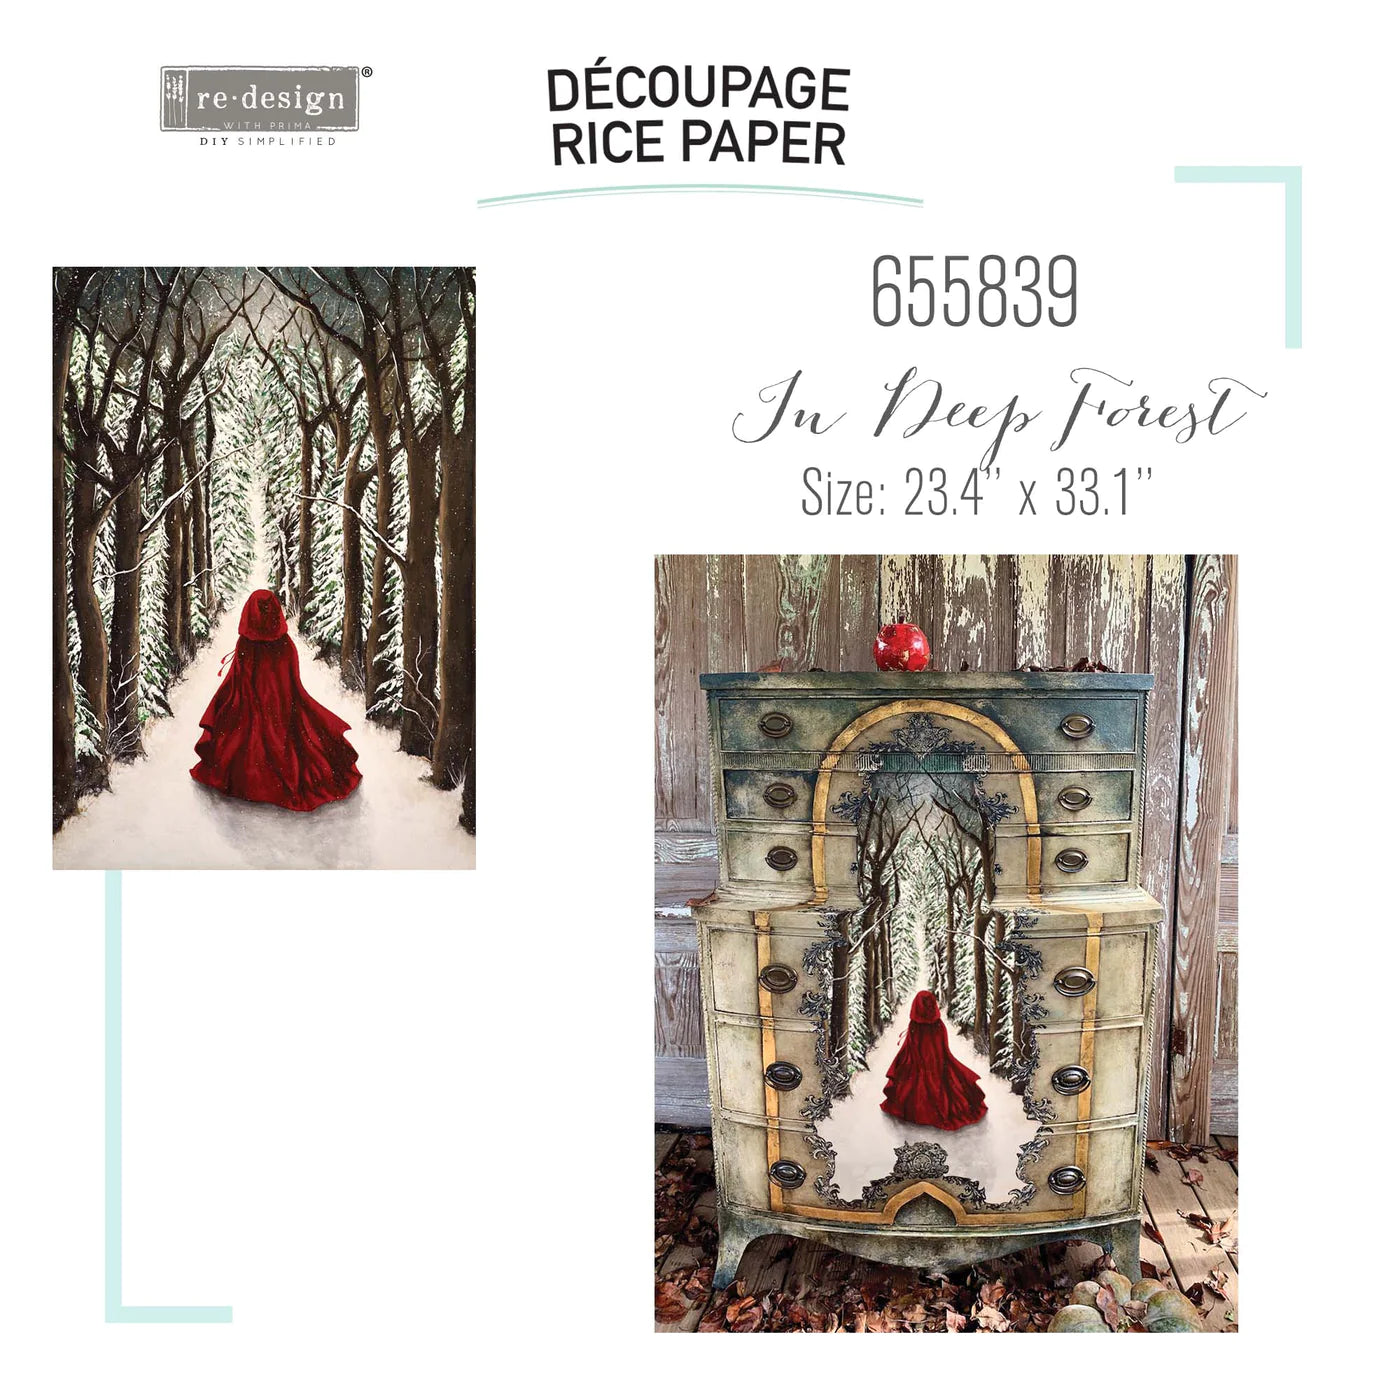 In Deep Forest -Redesign Decoupage Decor Rice Paper A1